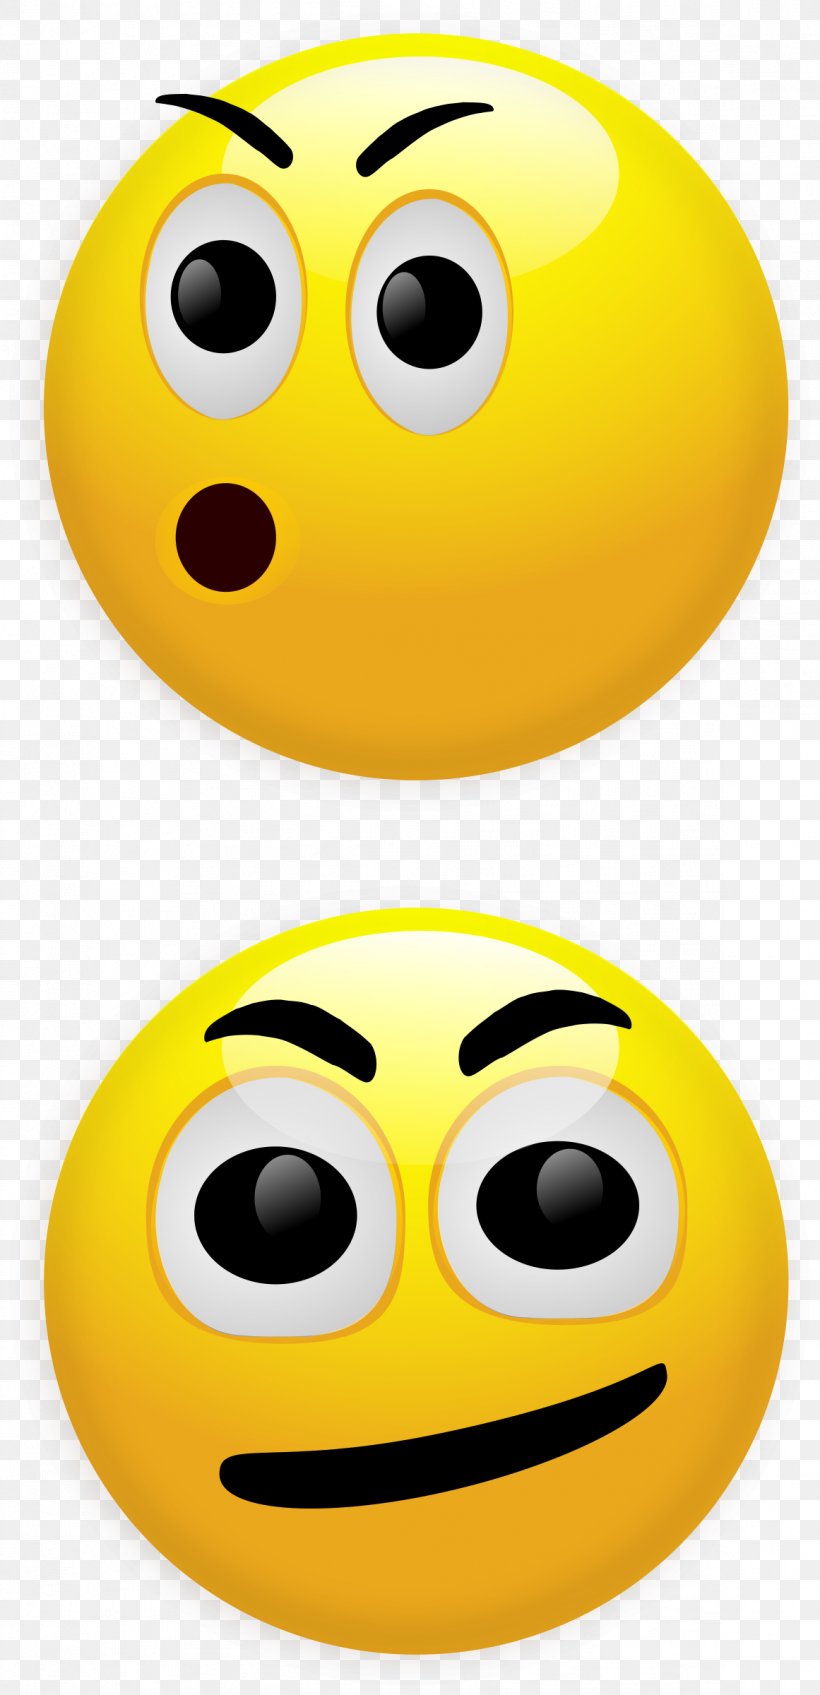 Smiley Emoticon Clip Art, PNG, 1161x2400px, Smiley, Emoticon, Facial Expression, Happiness, Photography Download Free